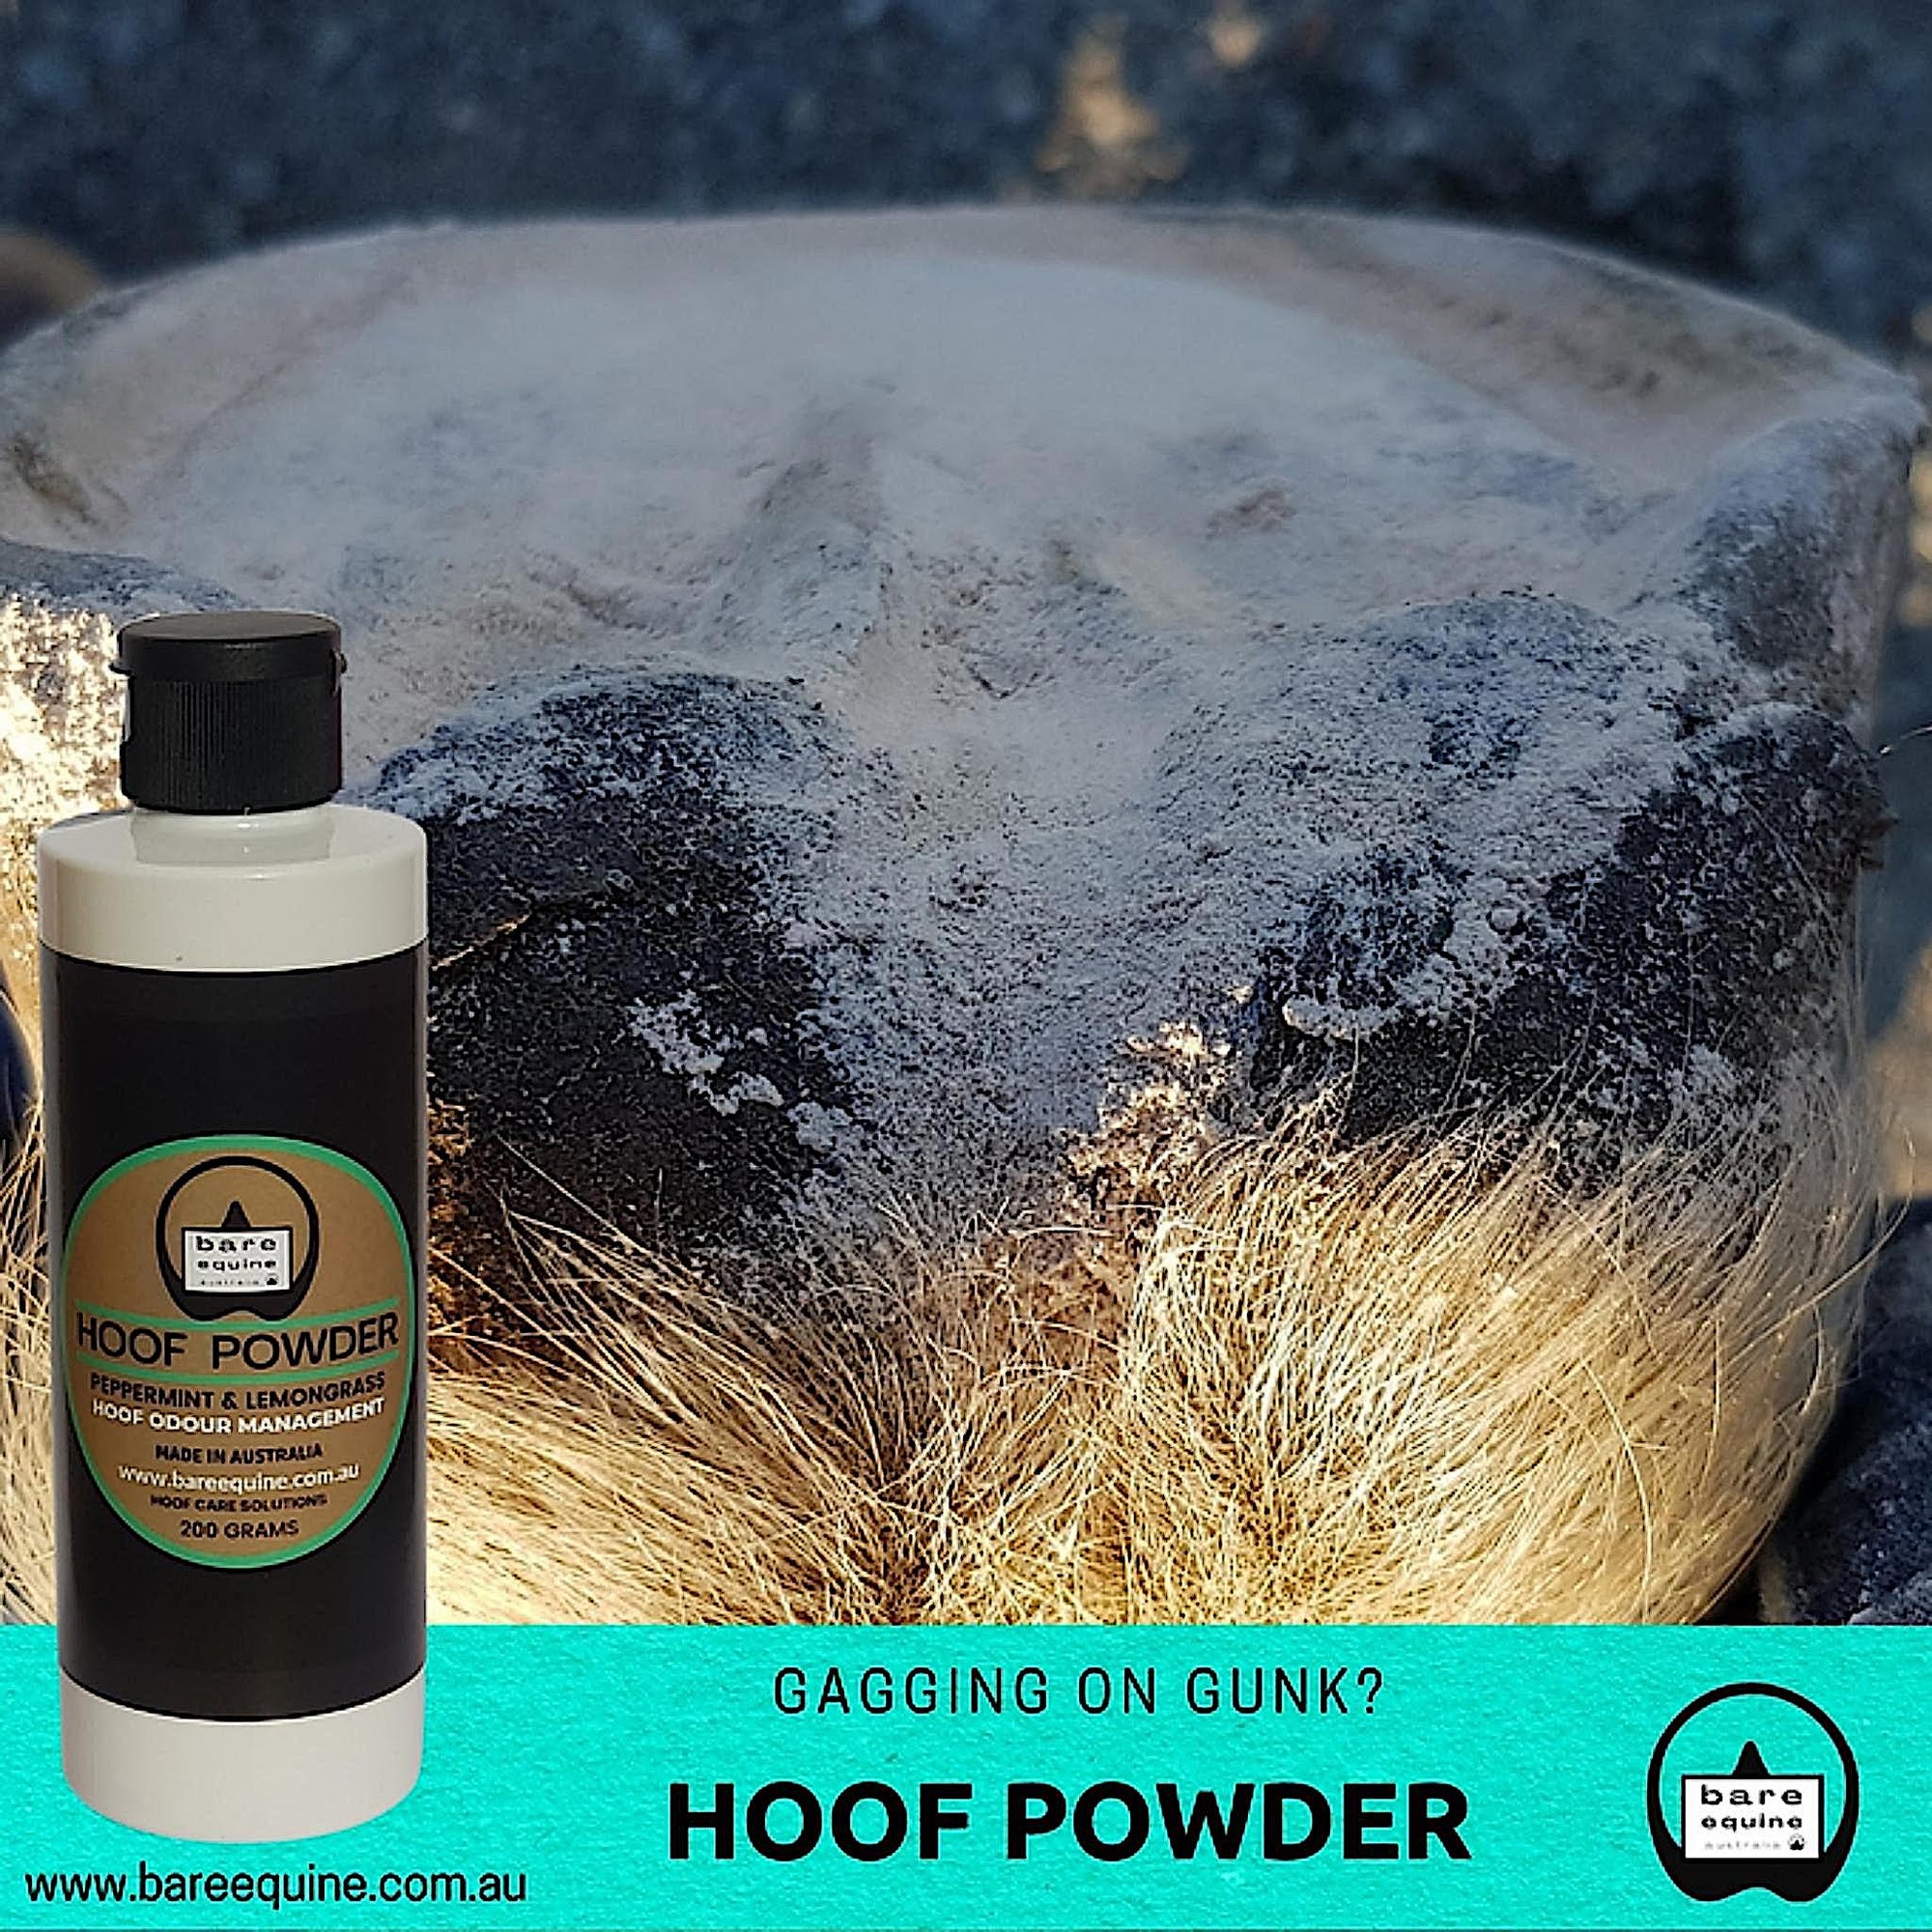 White cylindrical bottle of hoof powder with black lid and label.